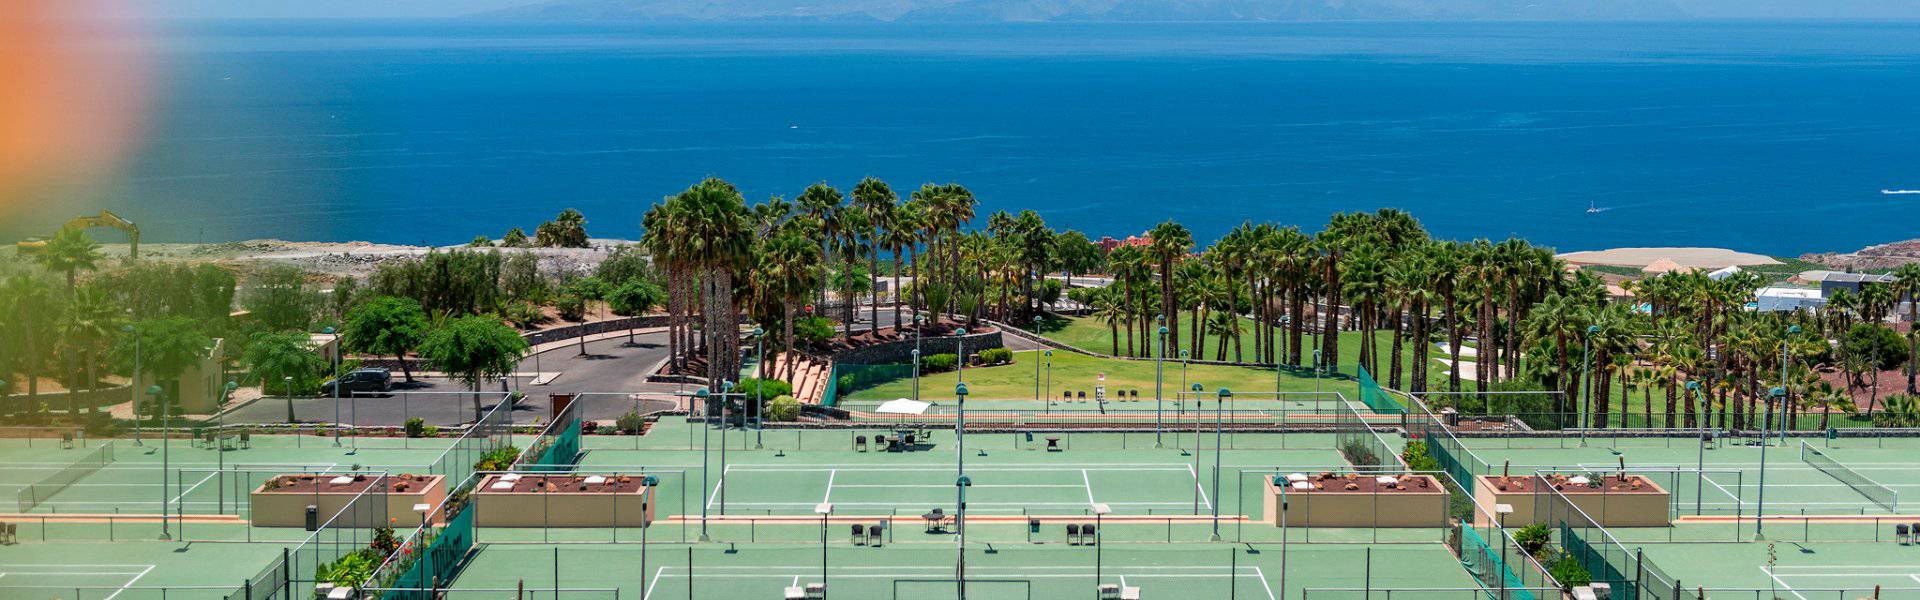 Play tennis and paddle tennis with the Atlantic Ocean as judge Abama Hotels